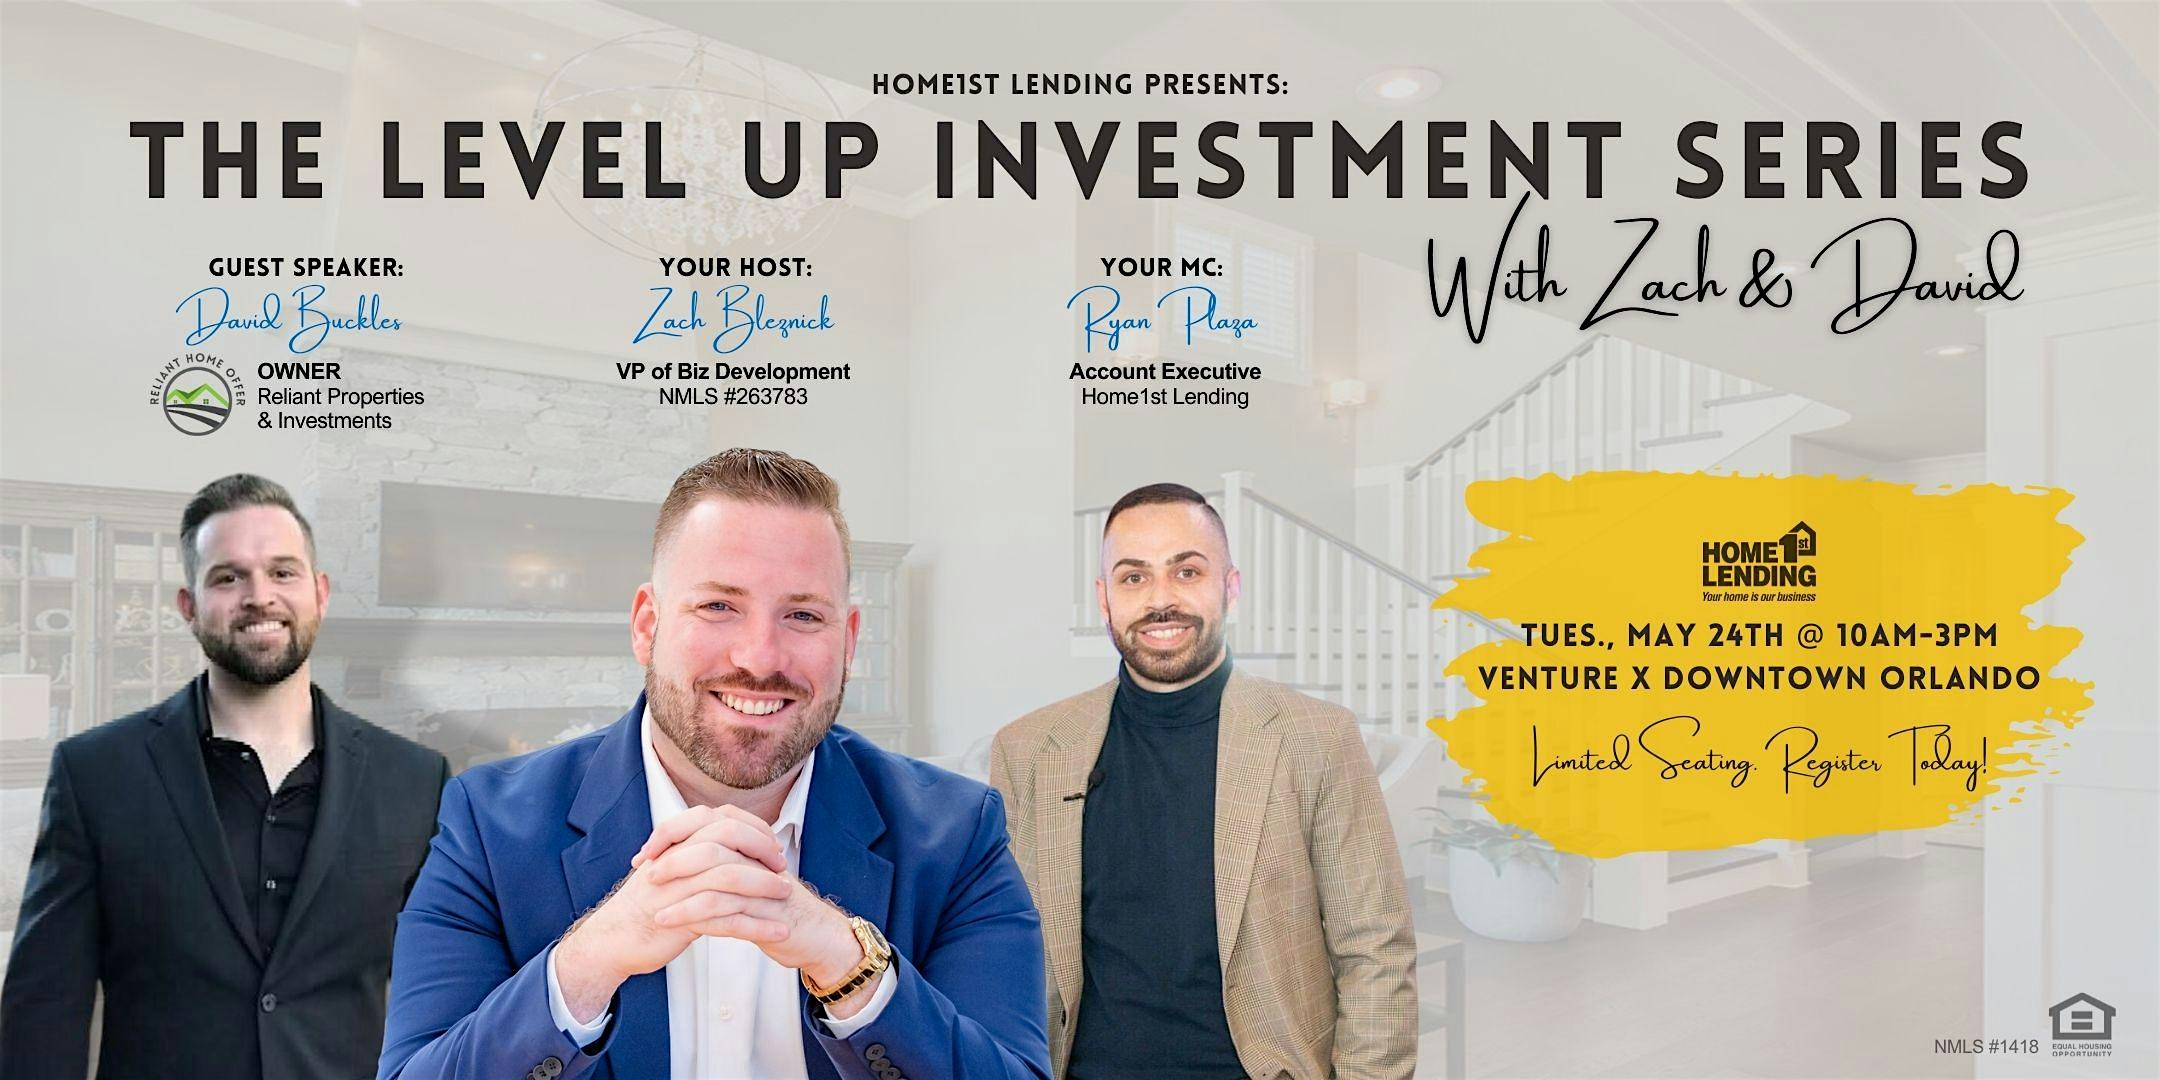 The Level Up Investment Series